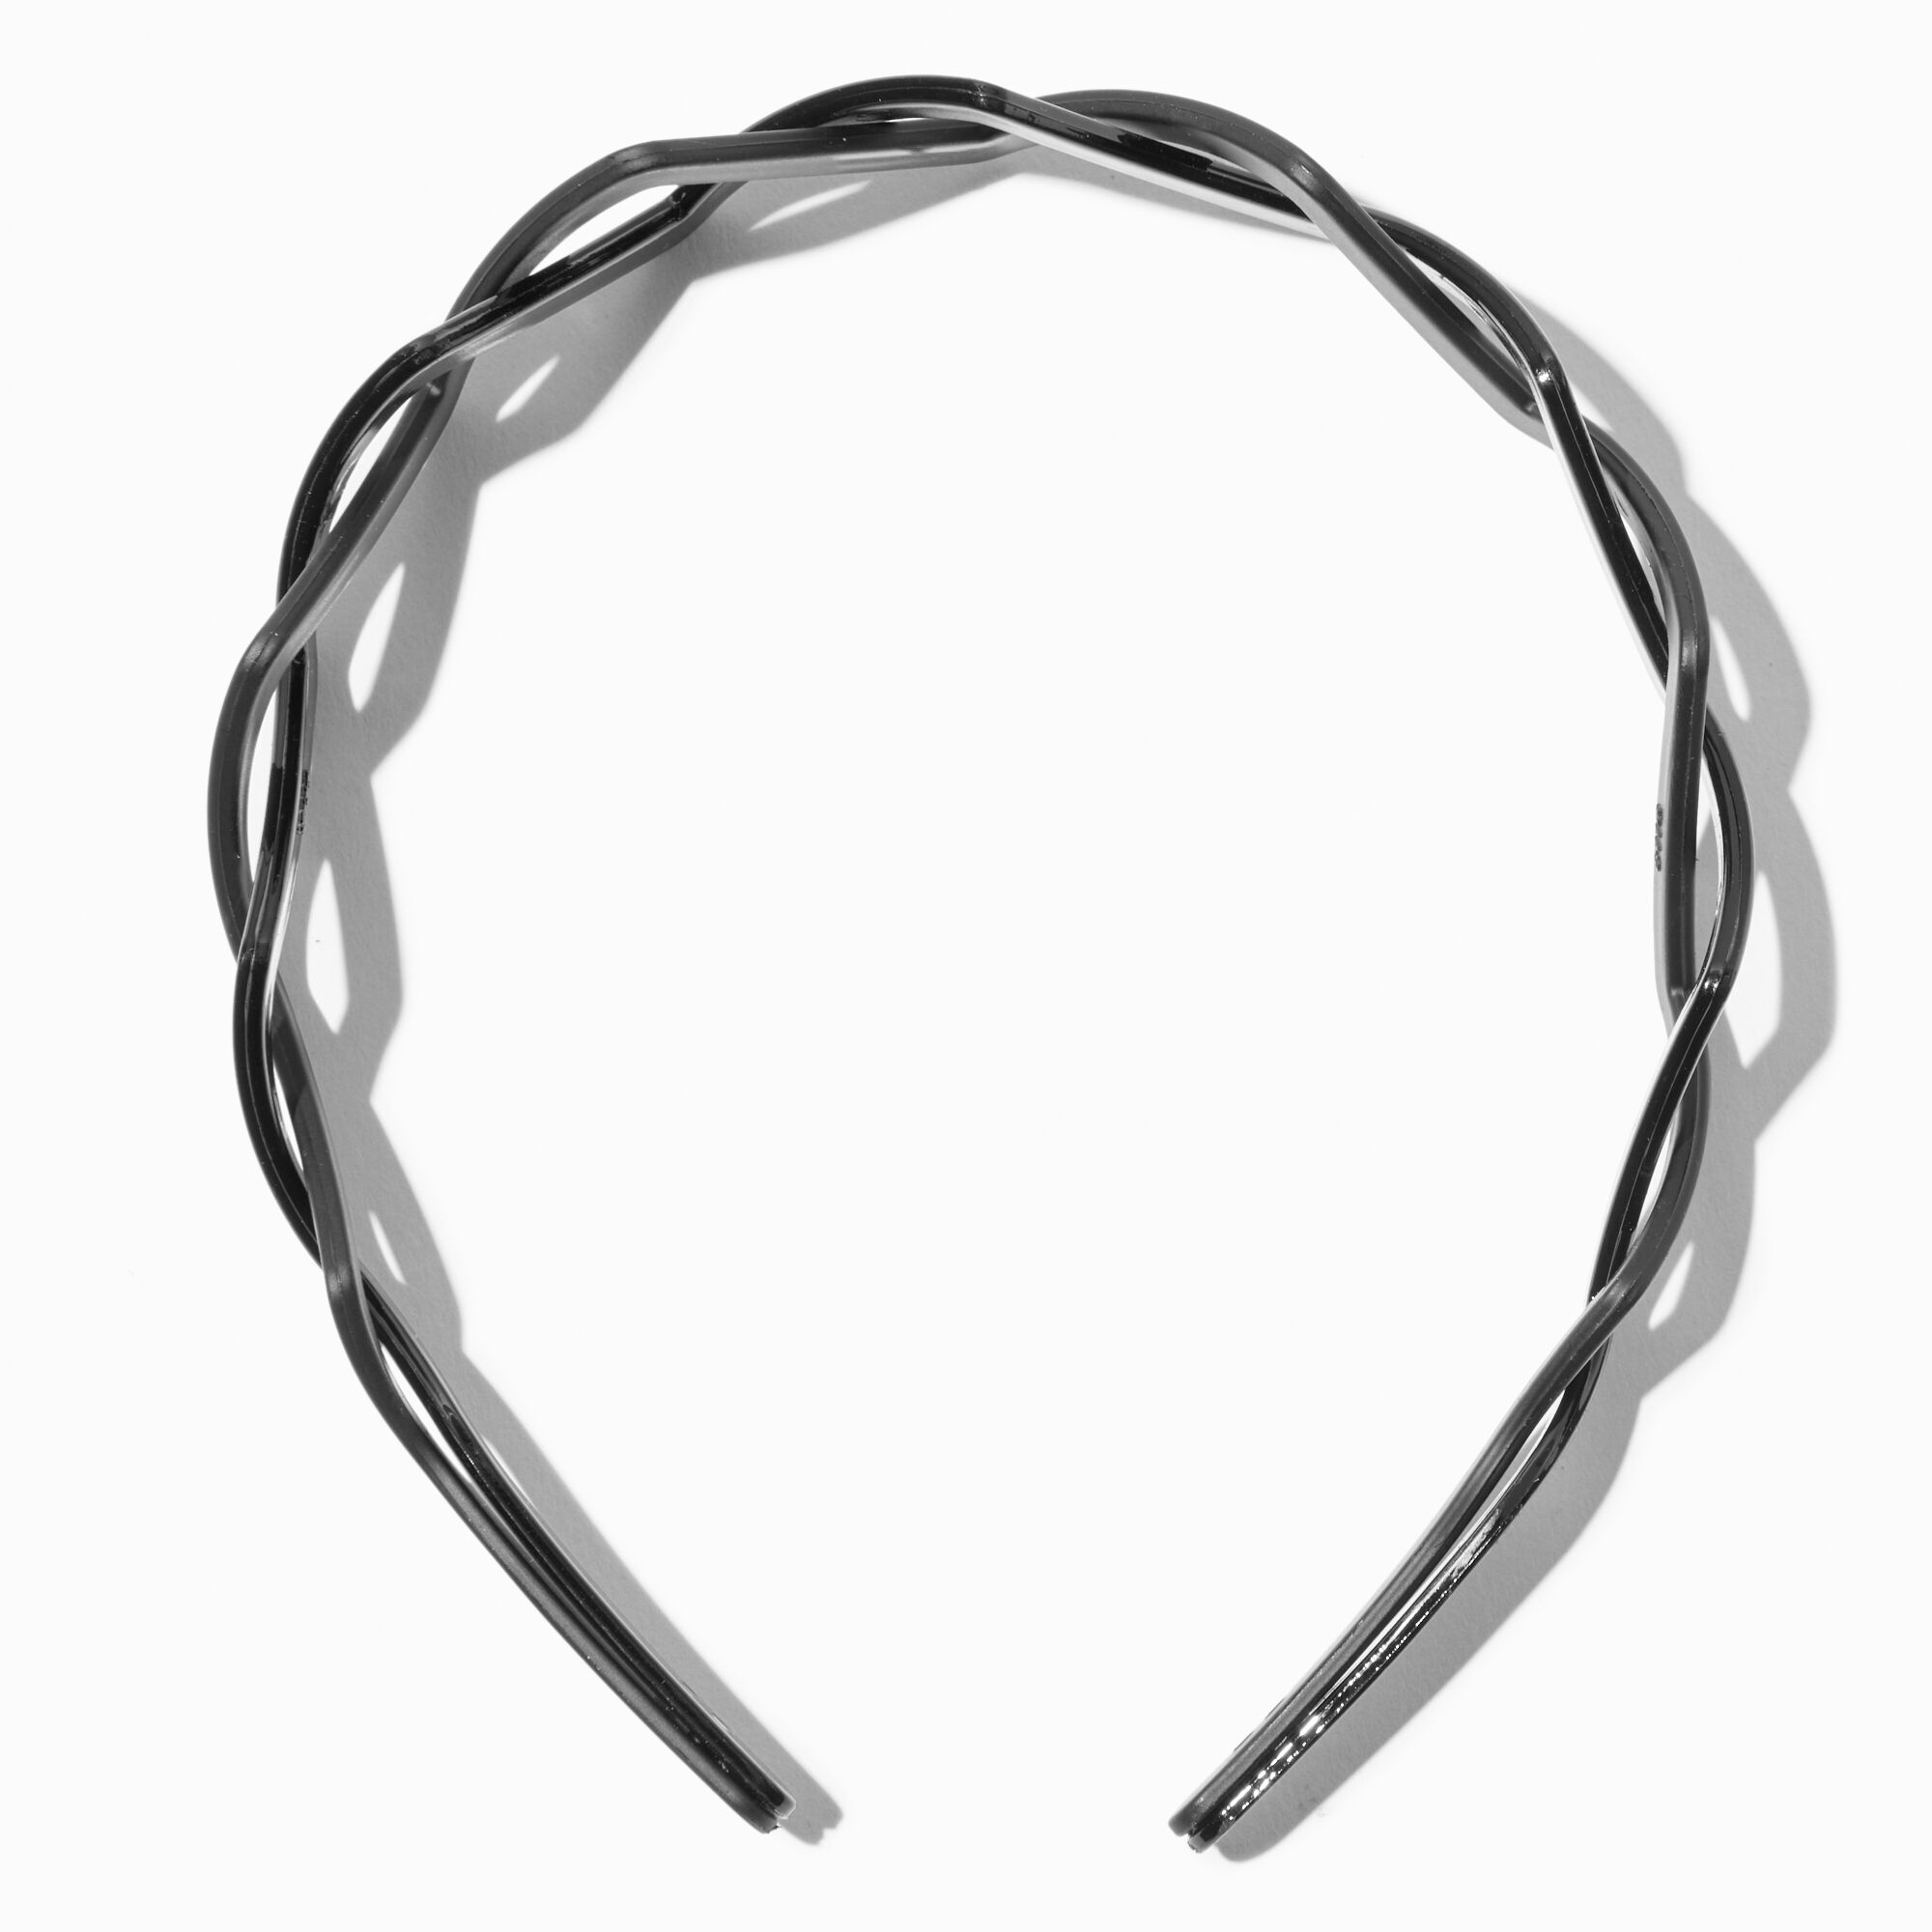 View Claires Triangle Braided Headband Black information